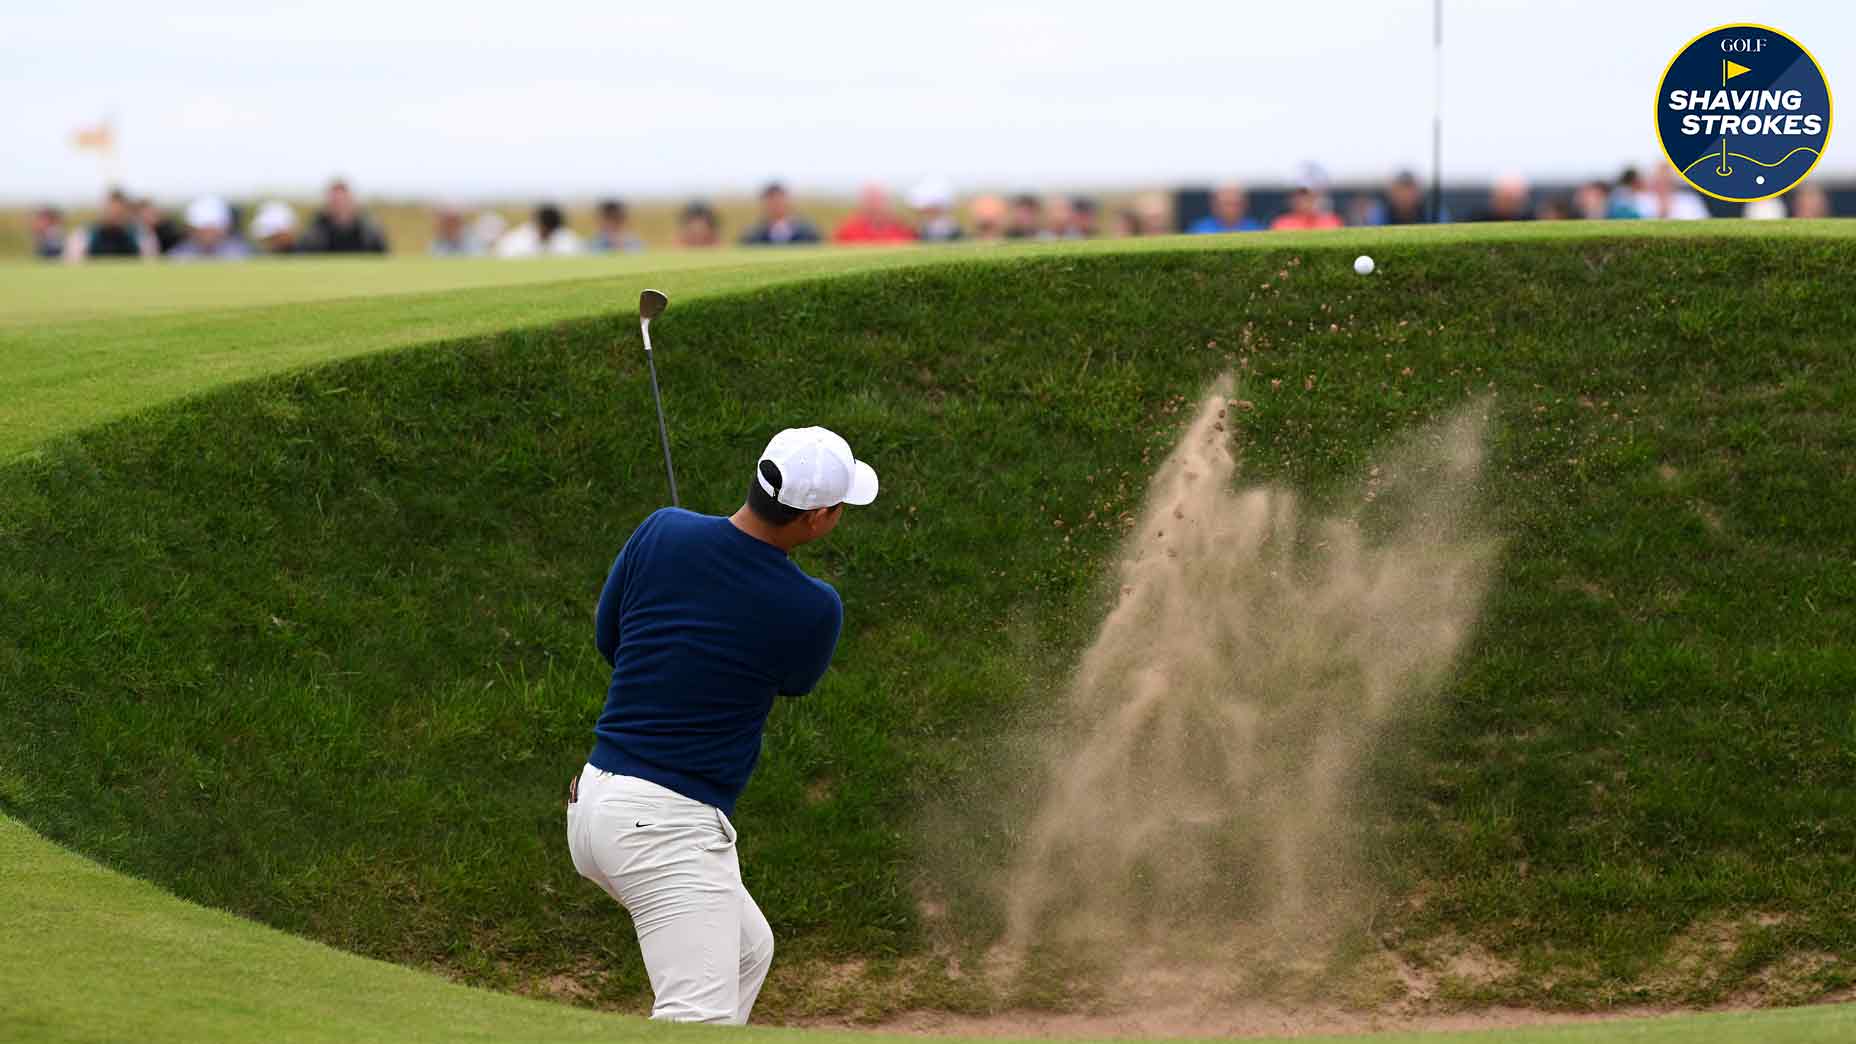 Pro golfer hits out of pot bunker at Royal Troon during Open Championship